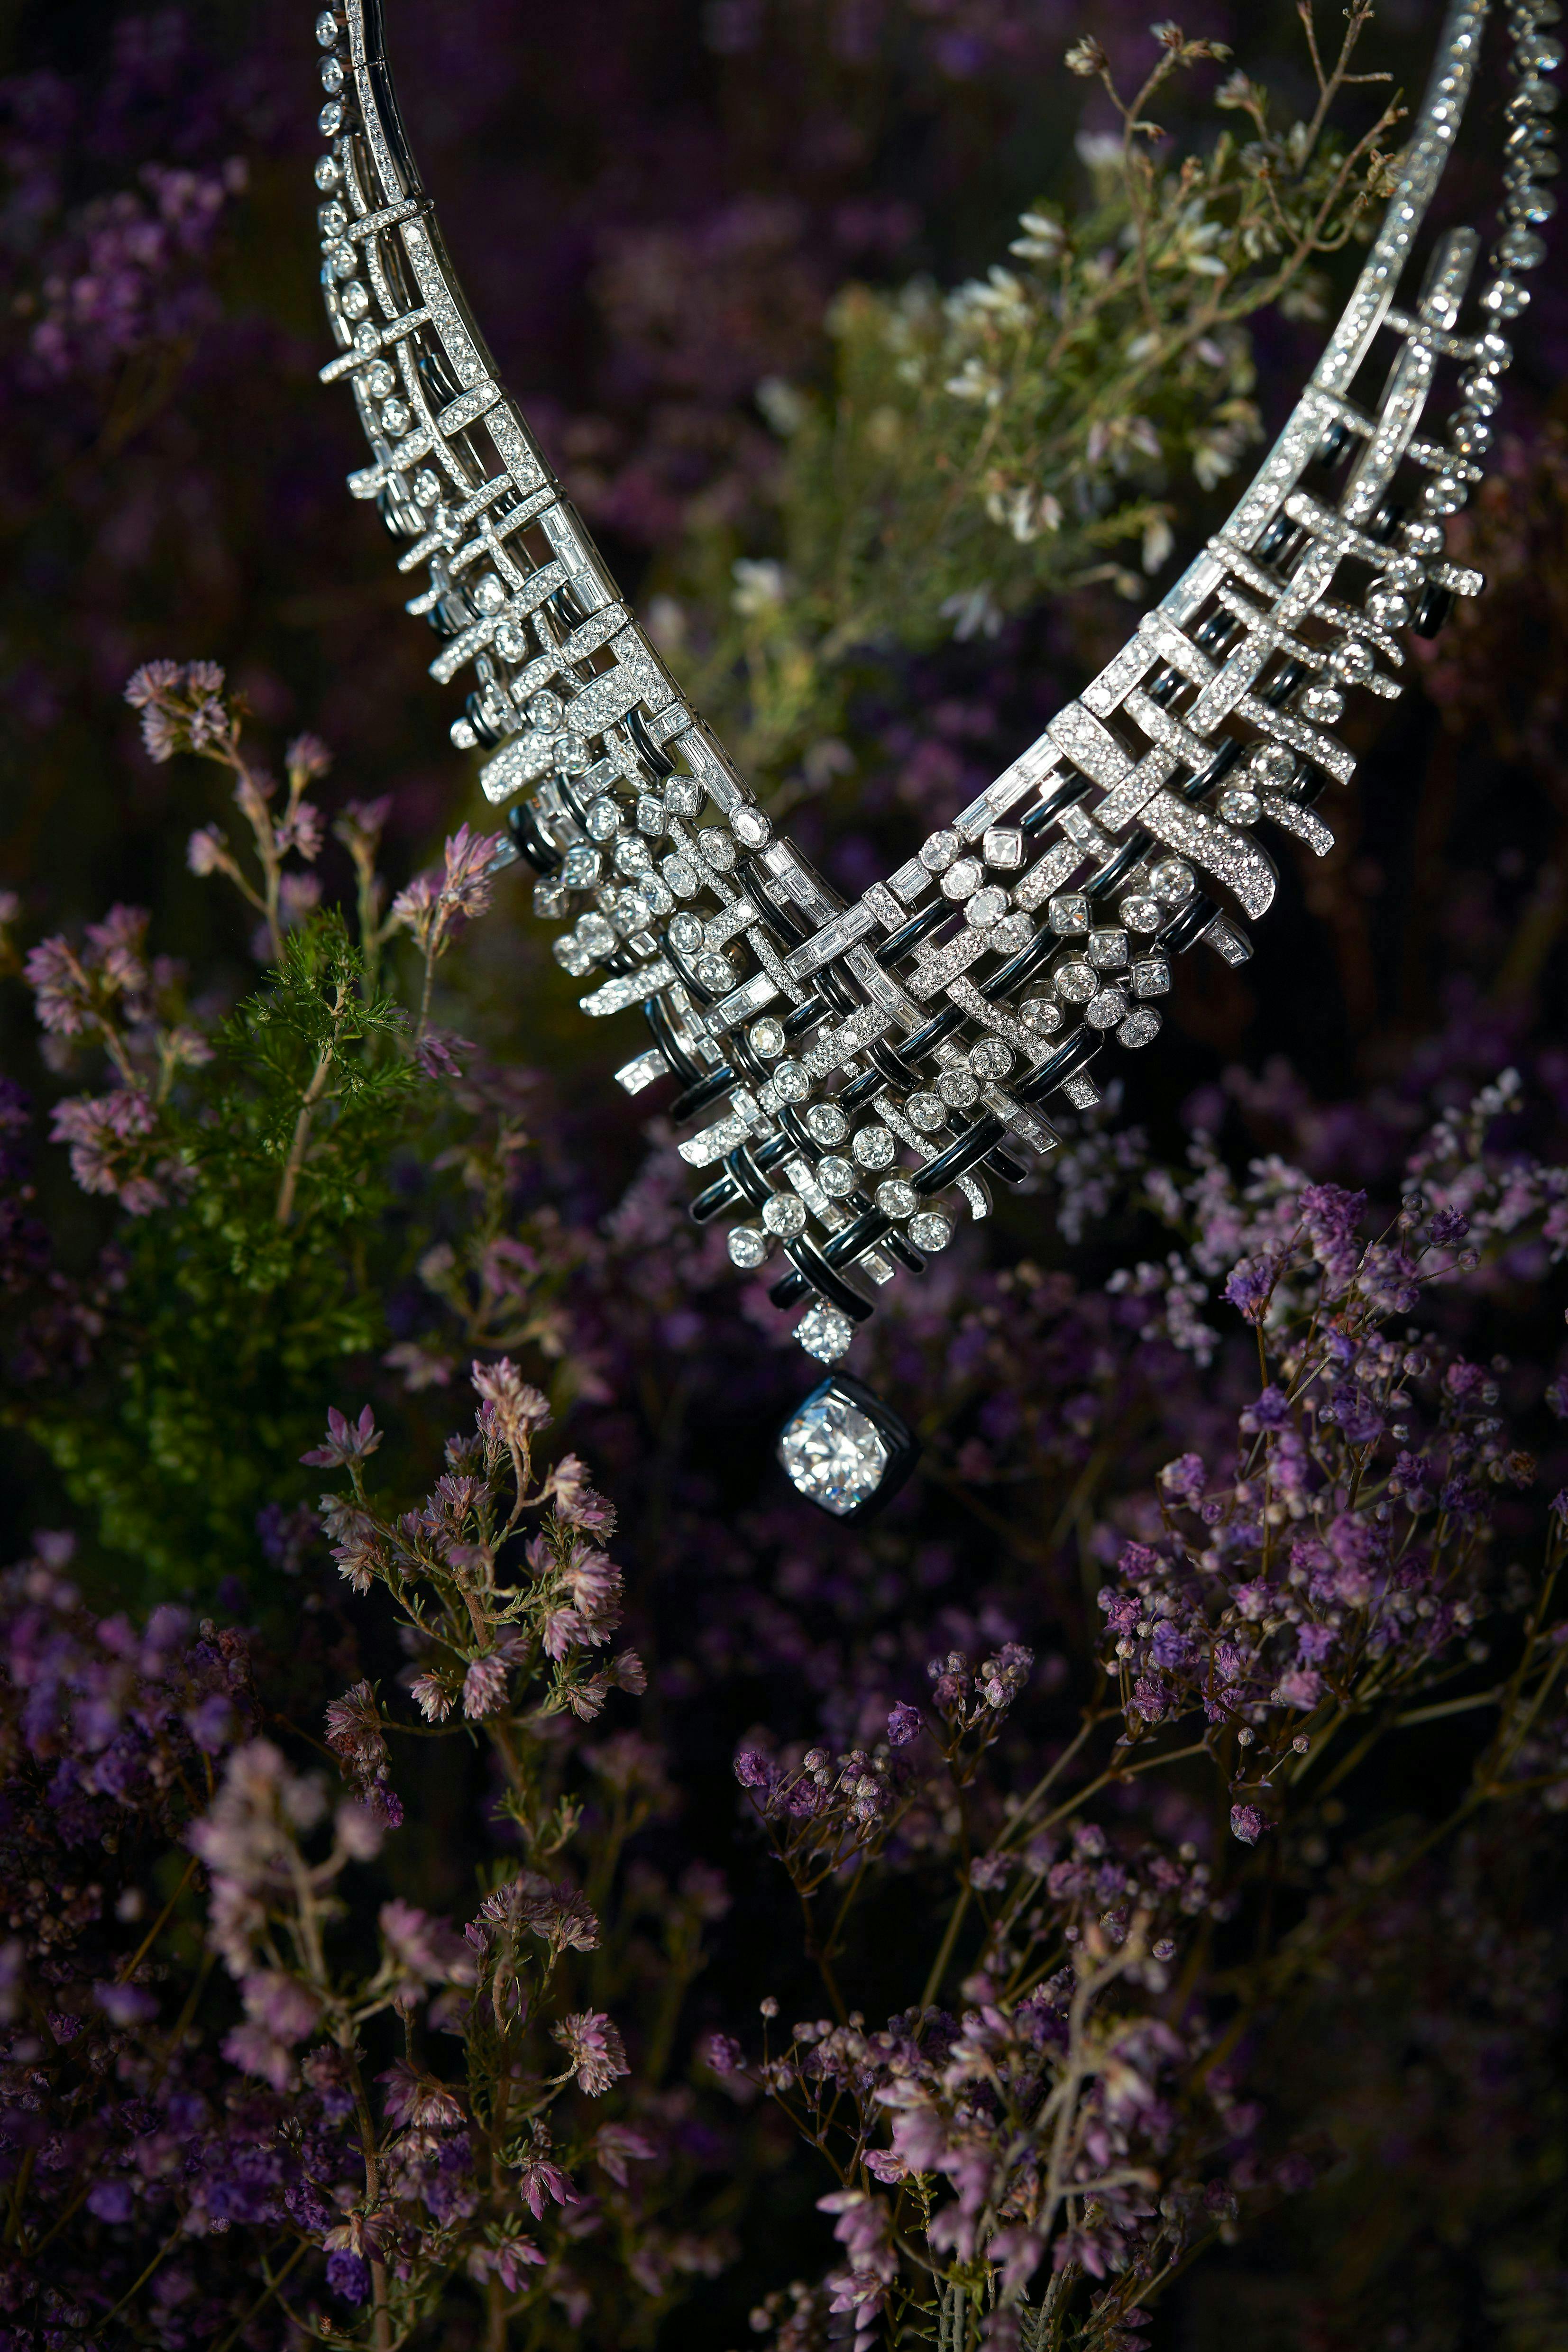 Chanel unveils new Tweed high jewellery collection in London